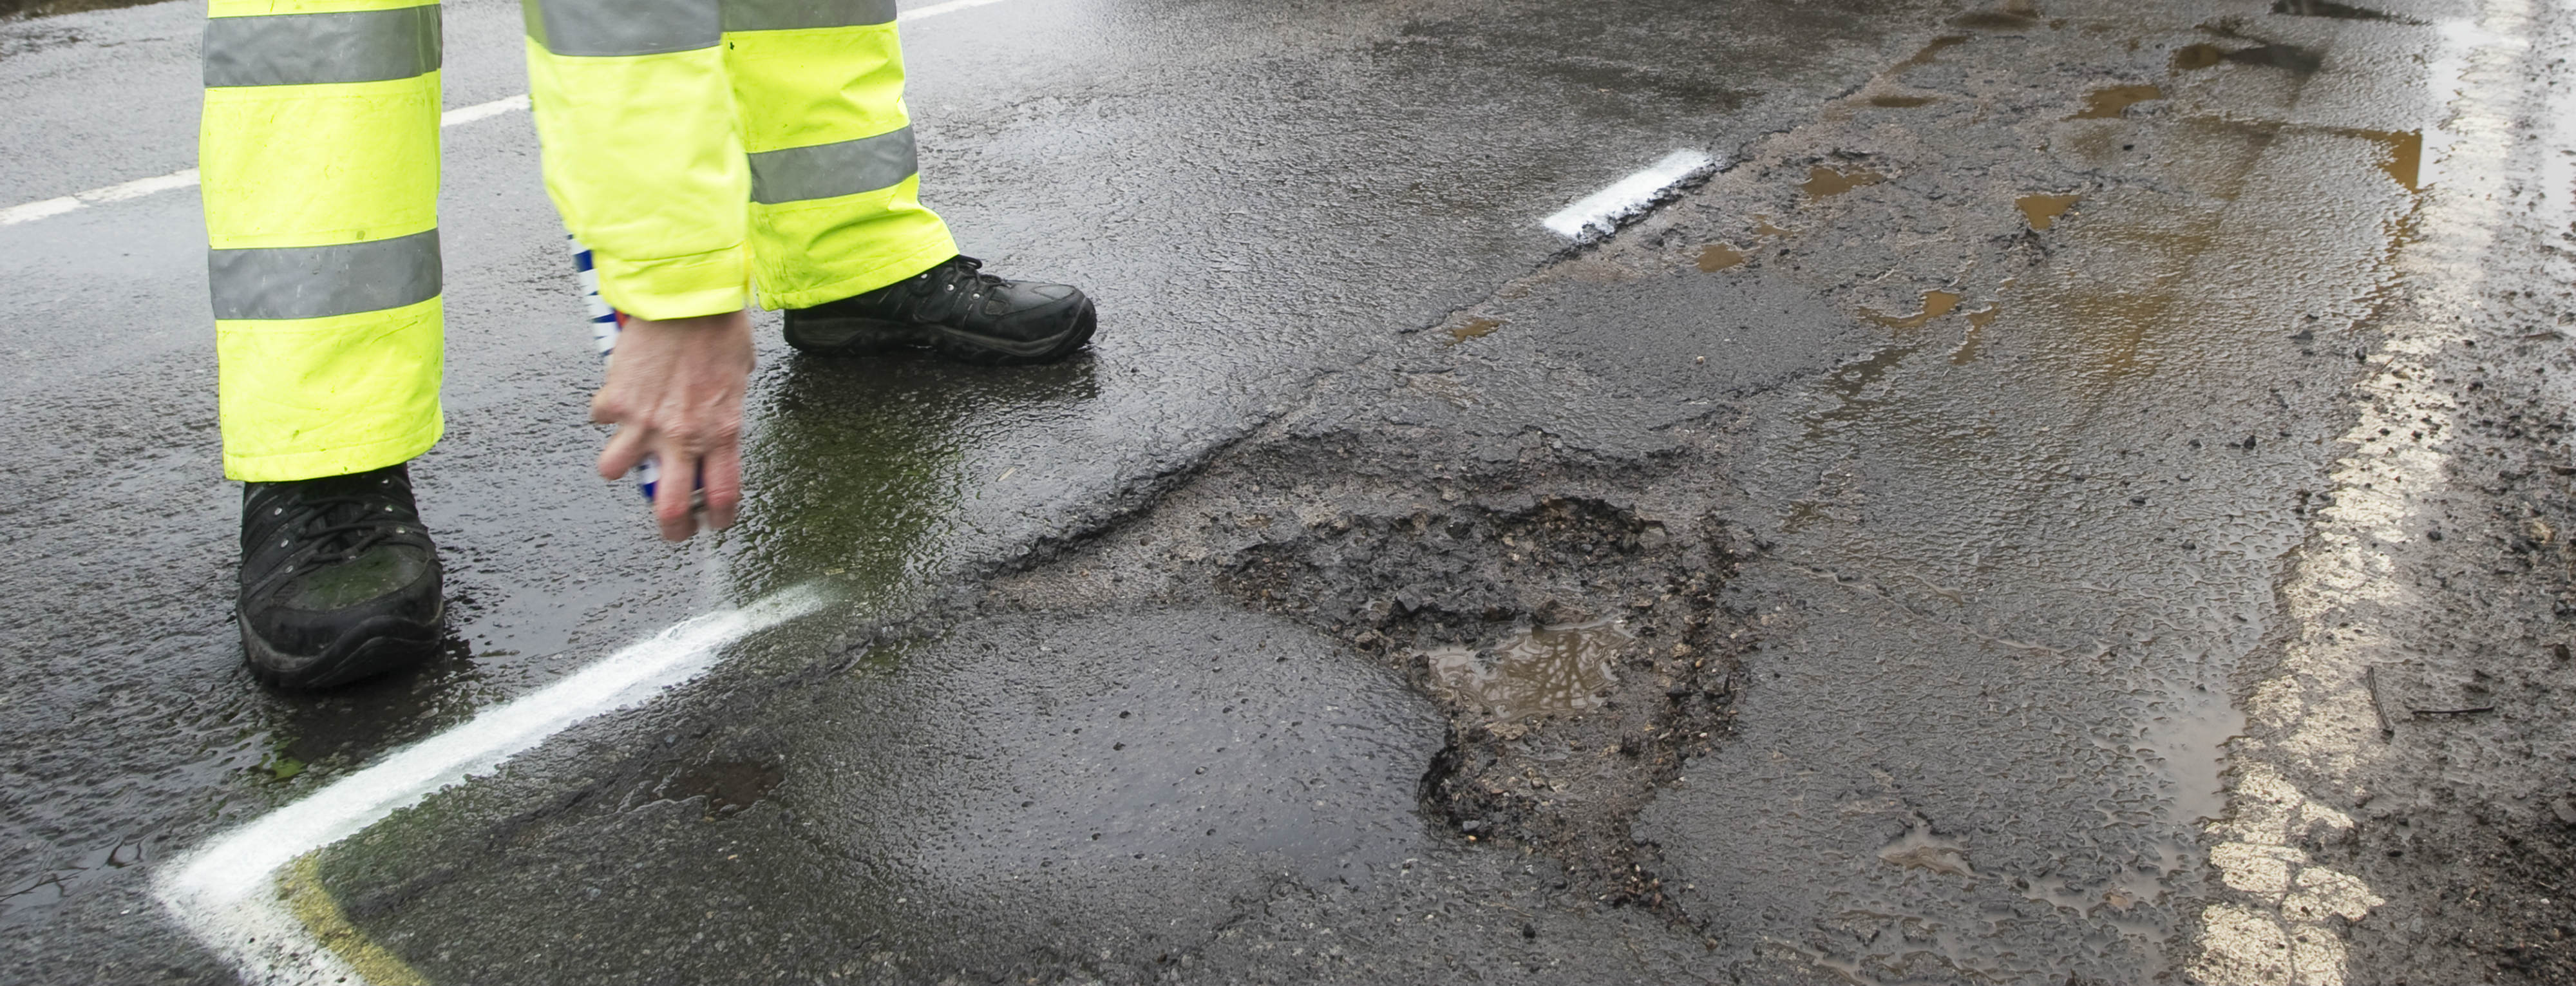 Guide to reporting road faults such as potholes and blocked drains